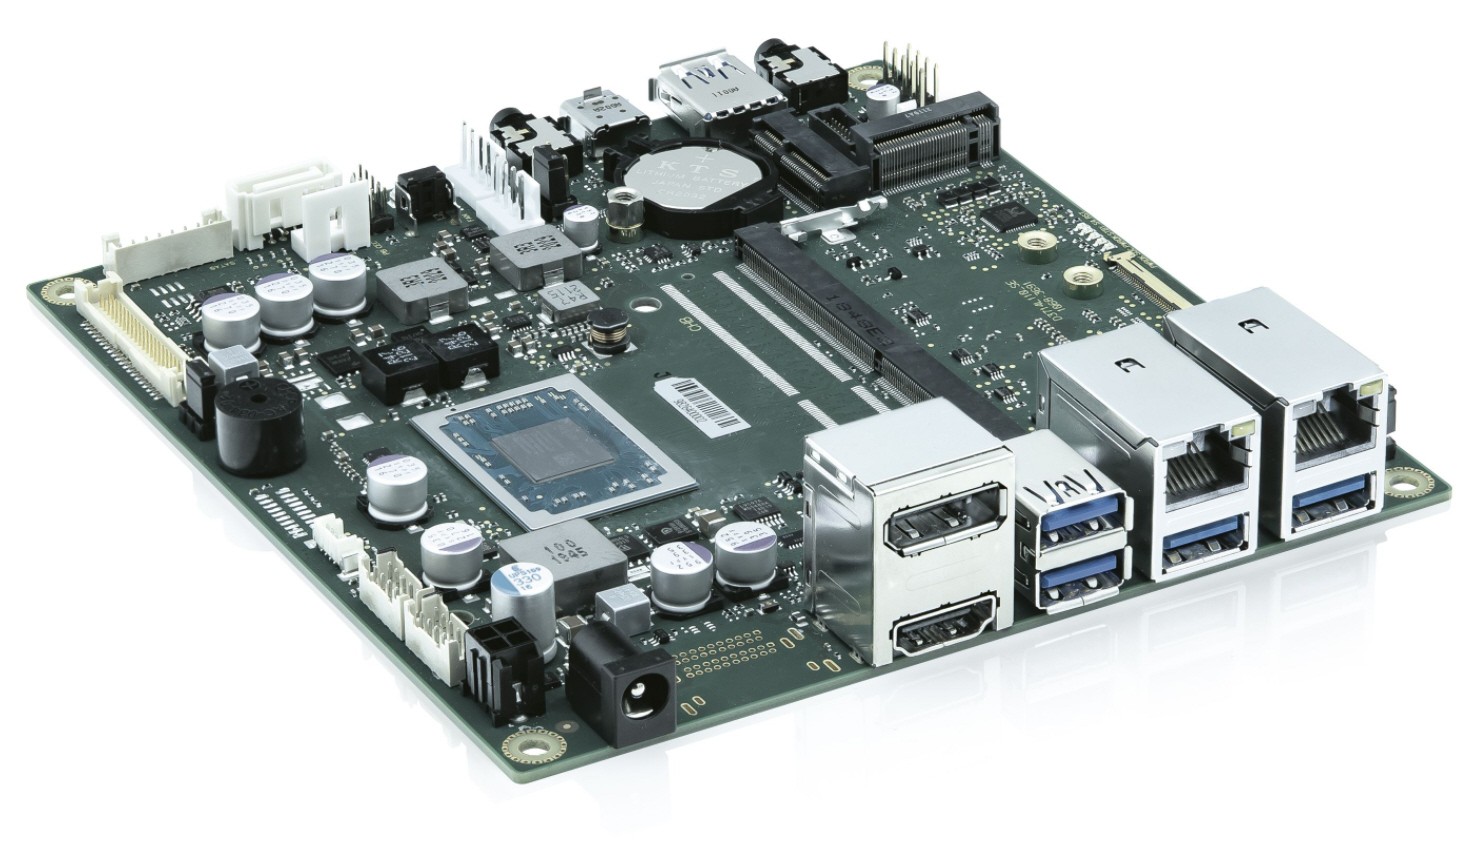 AMD Embedded V1605B SoC, Quad-Core 2.0/3.6GHz, up to 4 displays, 2x SO DIMM sockets for DDR4 2400